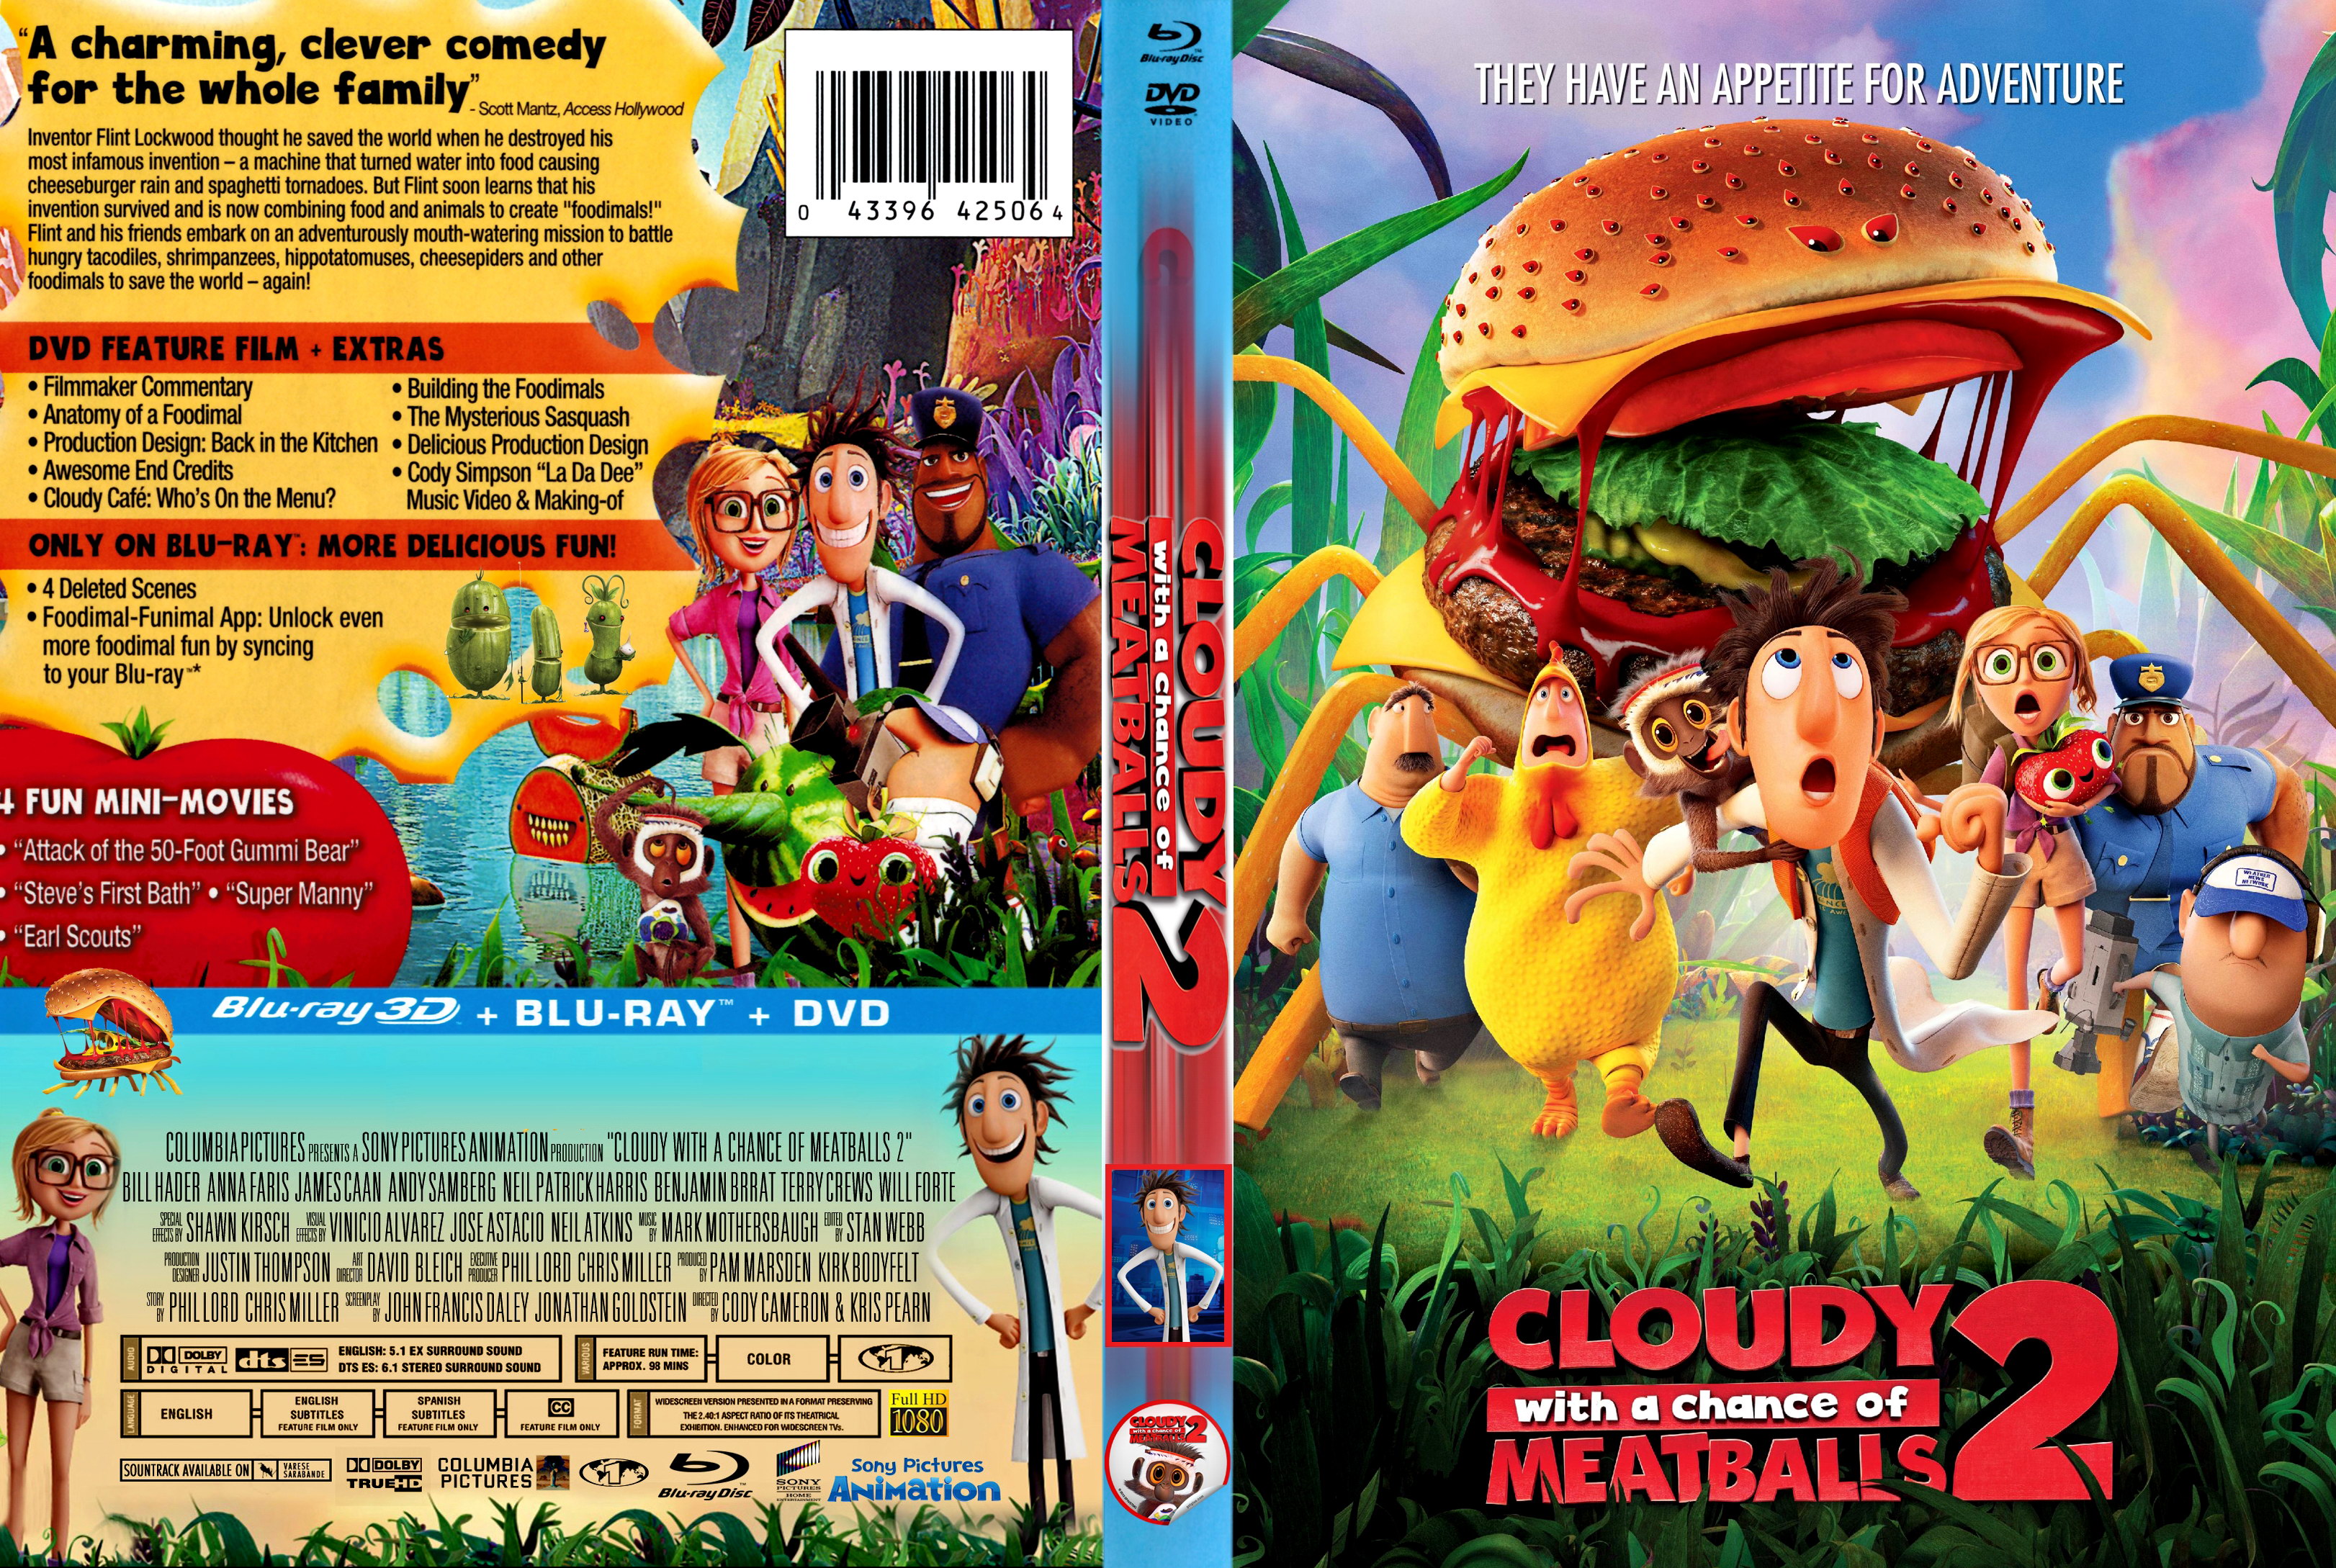 Cloudy with a Chance of Meatballs 2 - front.